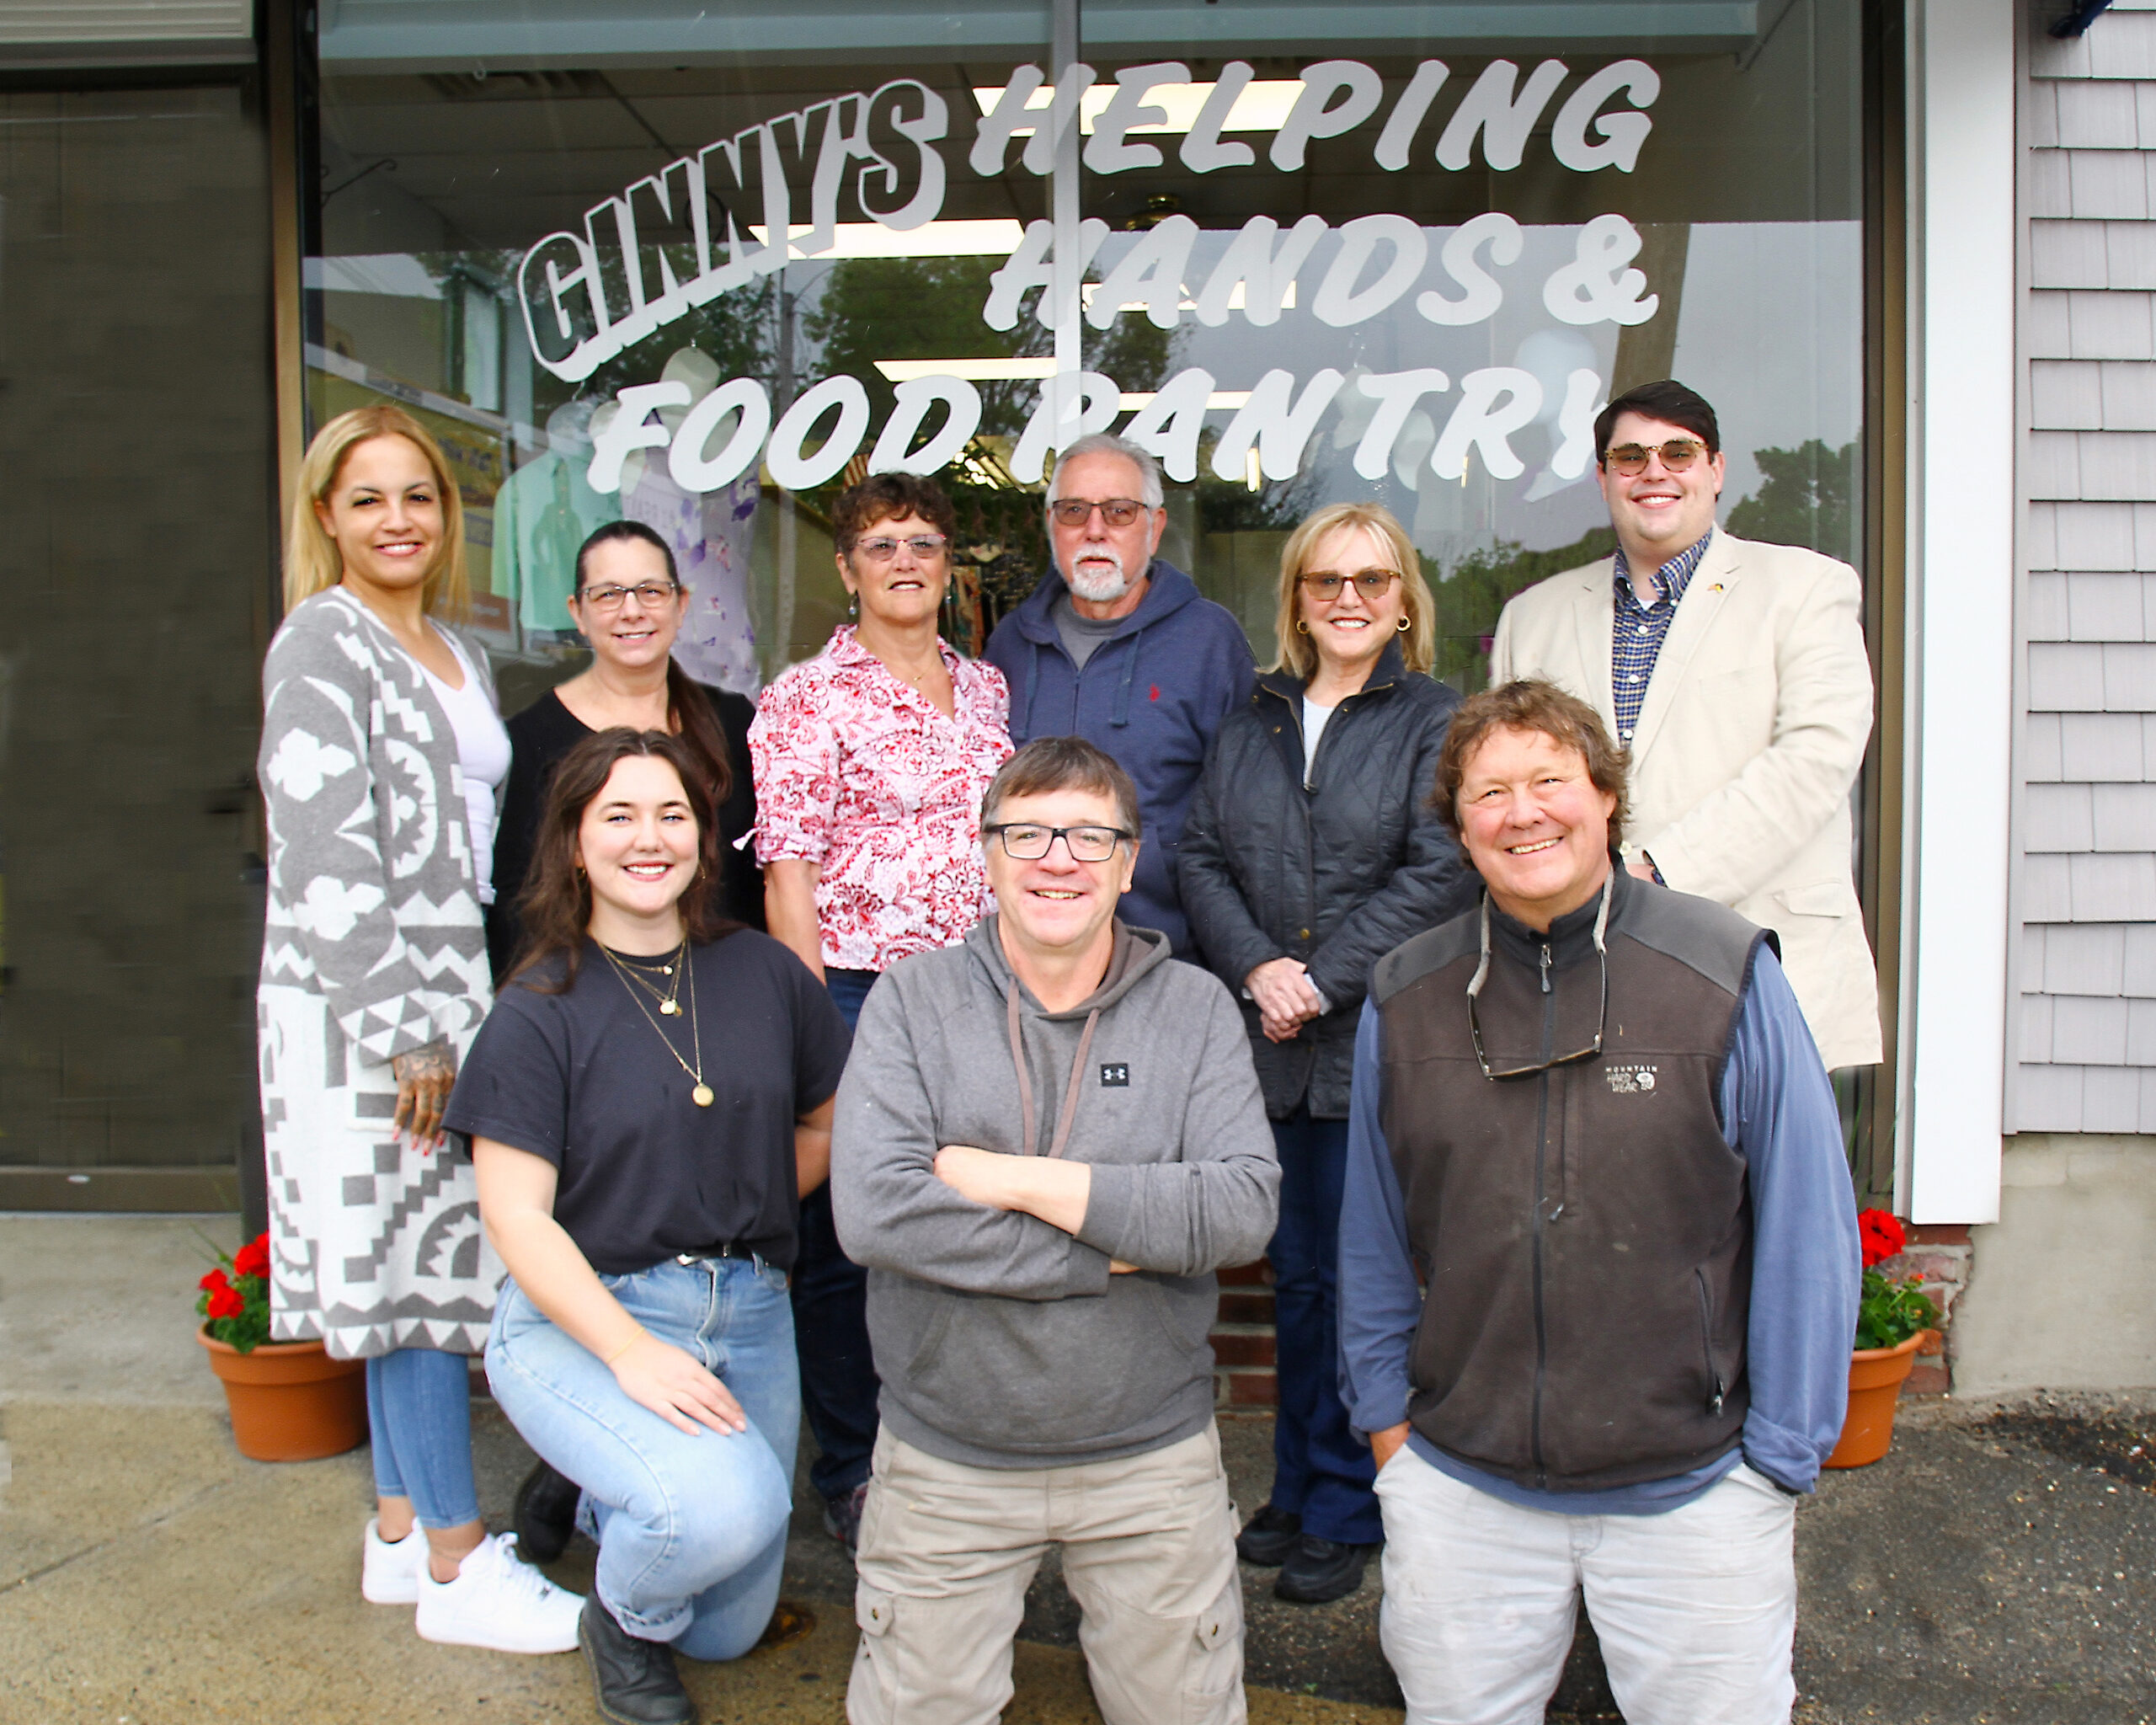 Ginny's staff from 

Left to Right Back Row: Mayra (Assistant Manager), Joan (Clothing Supervisor), Pat Freiss (Board of Directors and Volunteer) Rich Freiss (Volunteer), Sue Chalifoux Zephir (Board Clerk and Senior Advisor), Brandon L. Robbins (Executive Director) 

Front Row from Left to Right: Julia (Staff Member), Michael Pauley (Staff Member), Ed Zephir (Board of Directors and Volunteer)